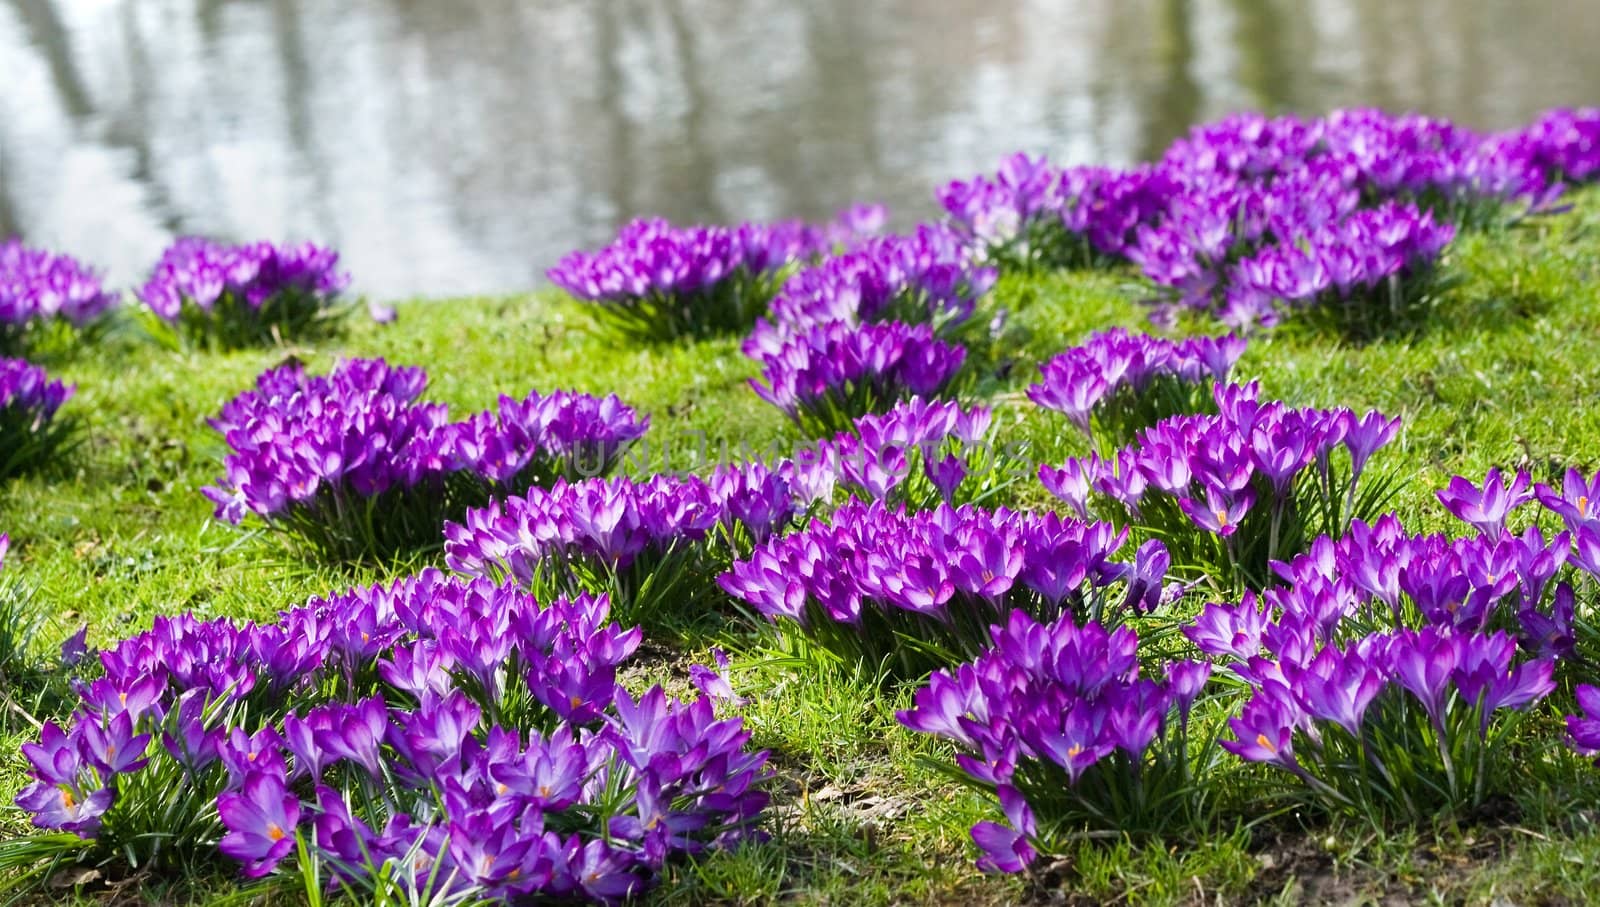 Purple crocus at the waterside by Colette